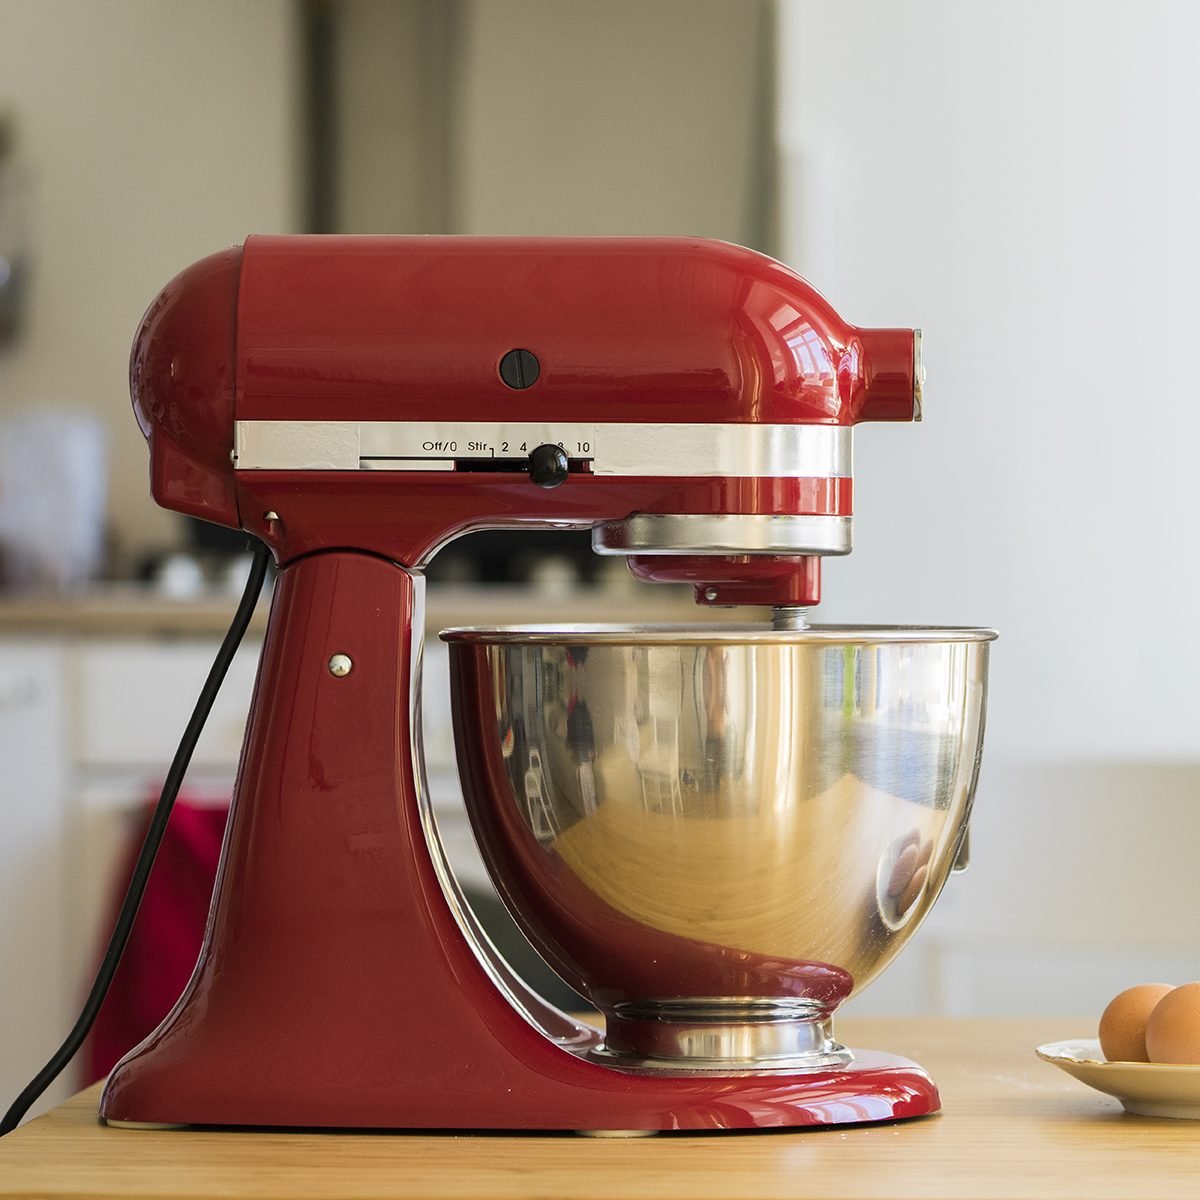 Do you really need a stand mixer? Yes – and here's why